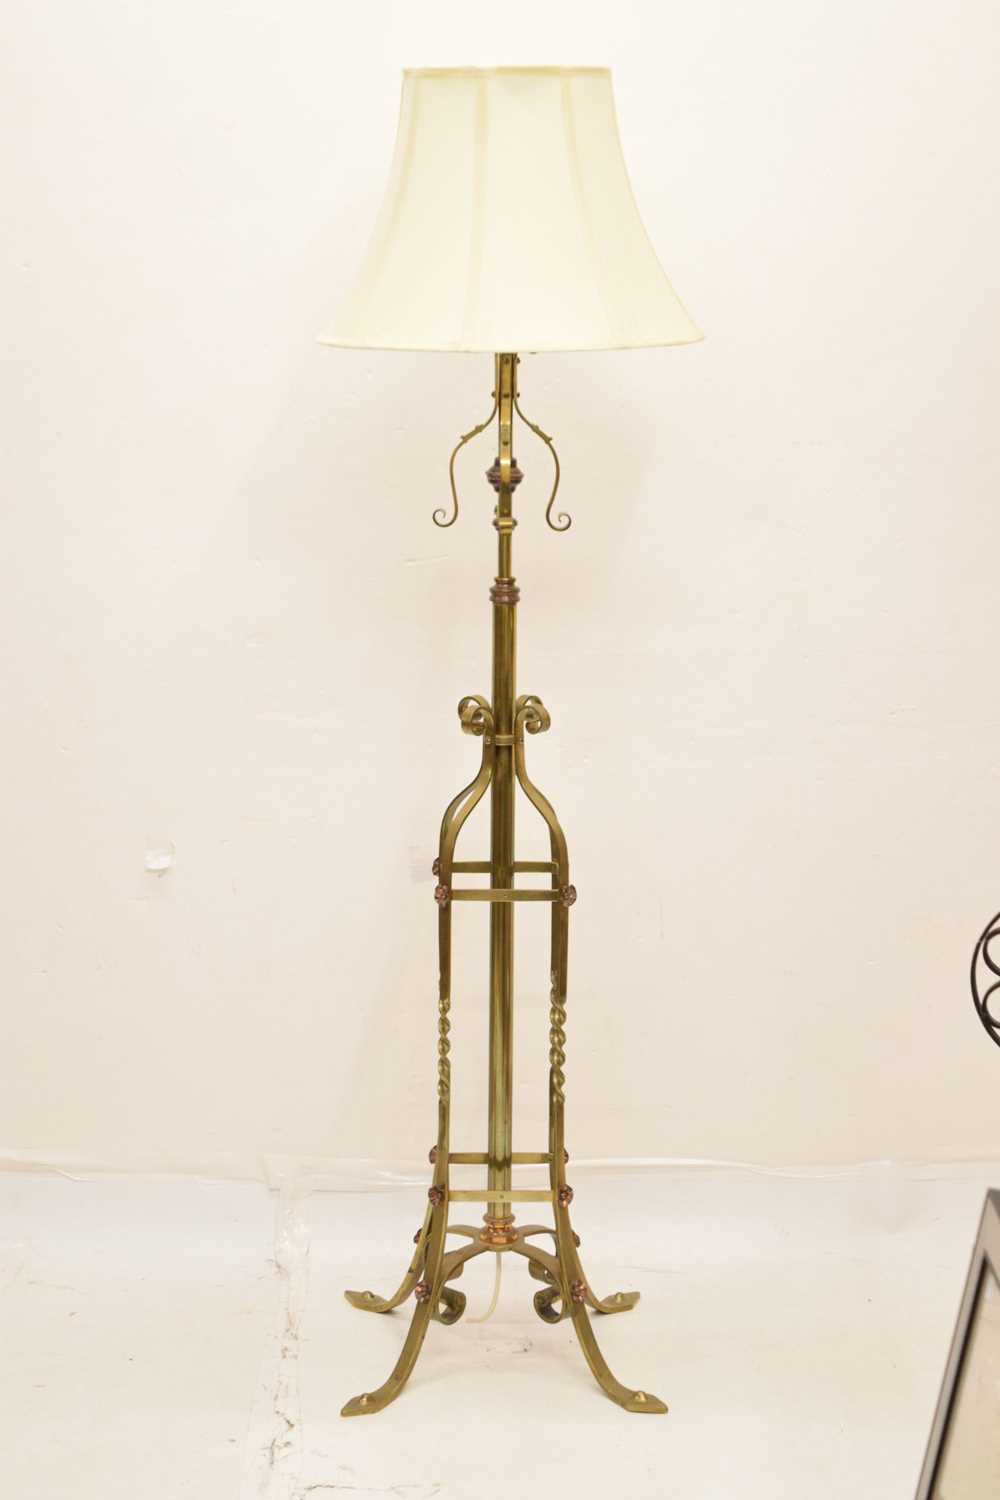 Early 20th century brass standard lamp - Image 4 of 7